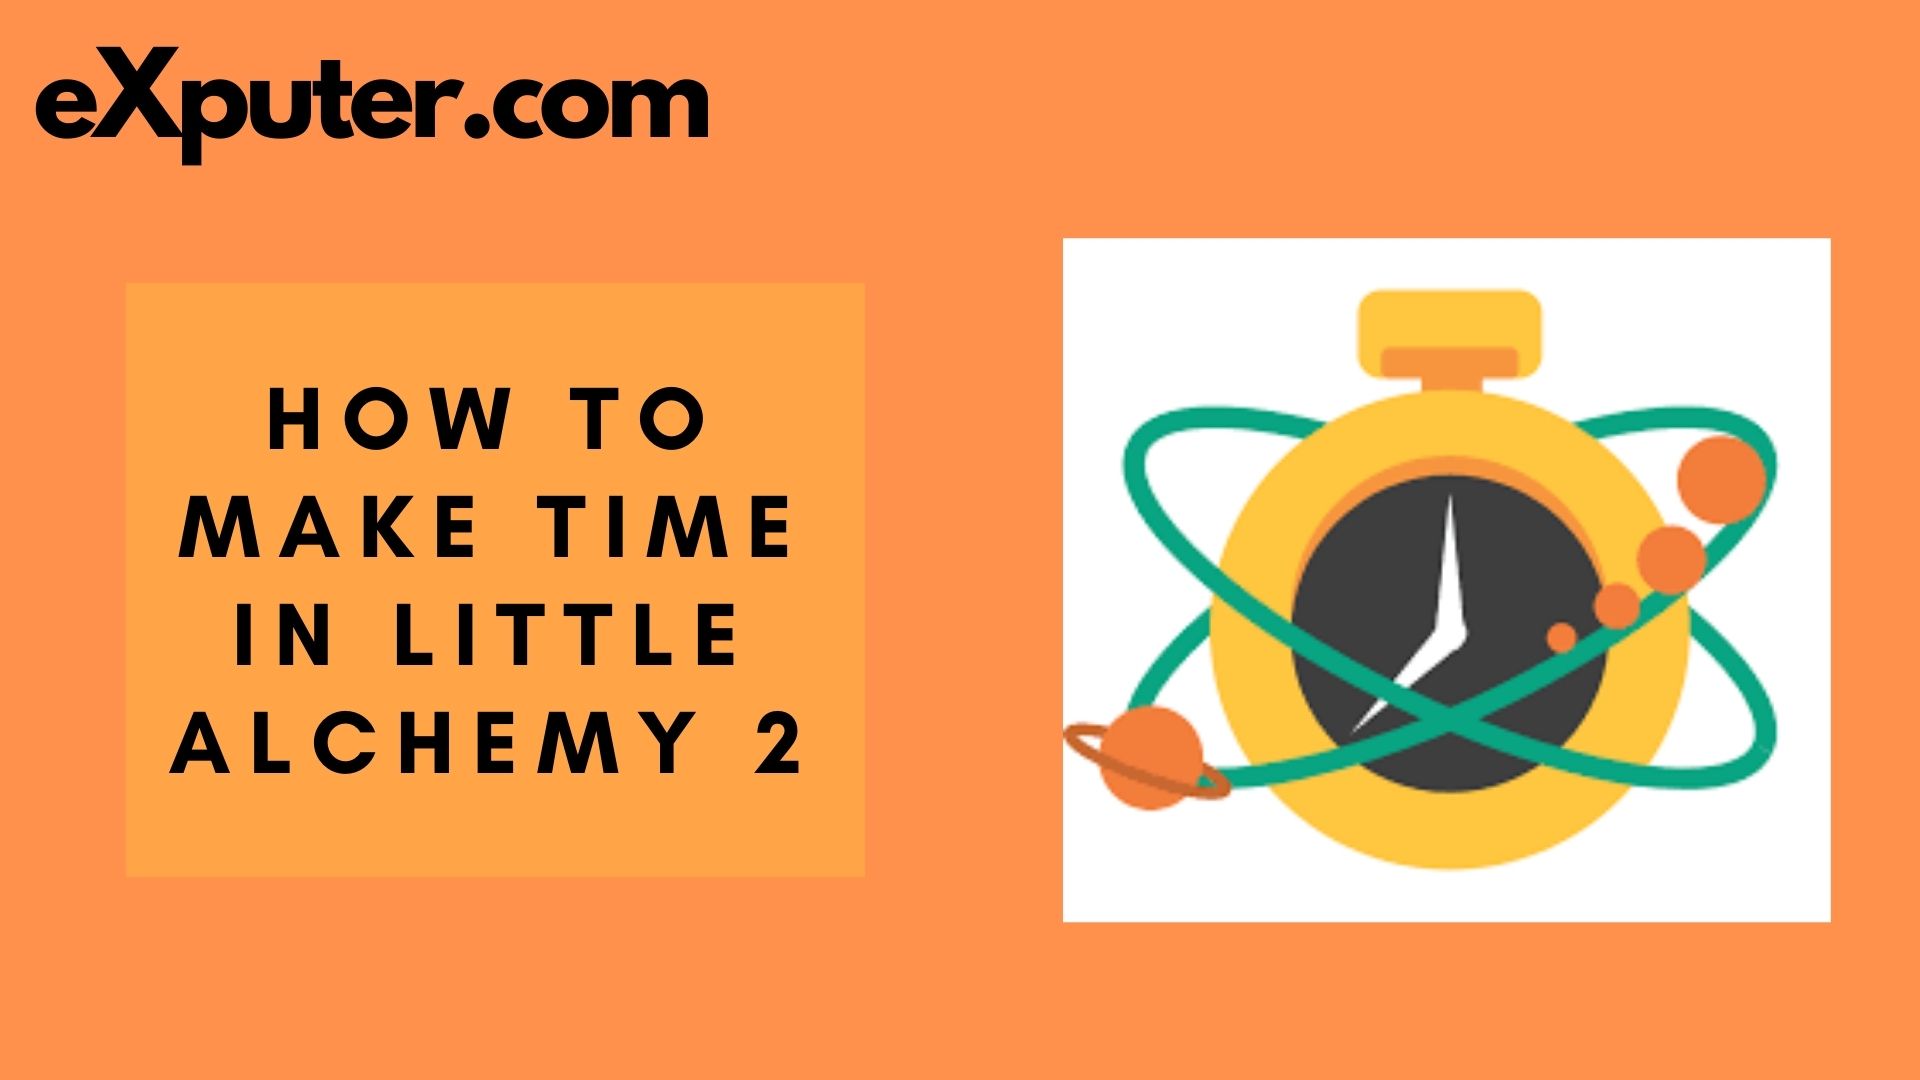 little alchemy 2 How to make time